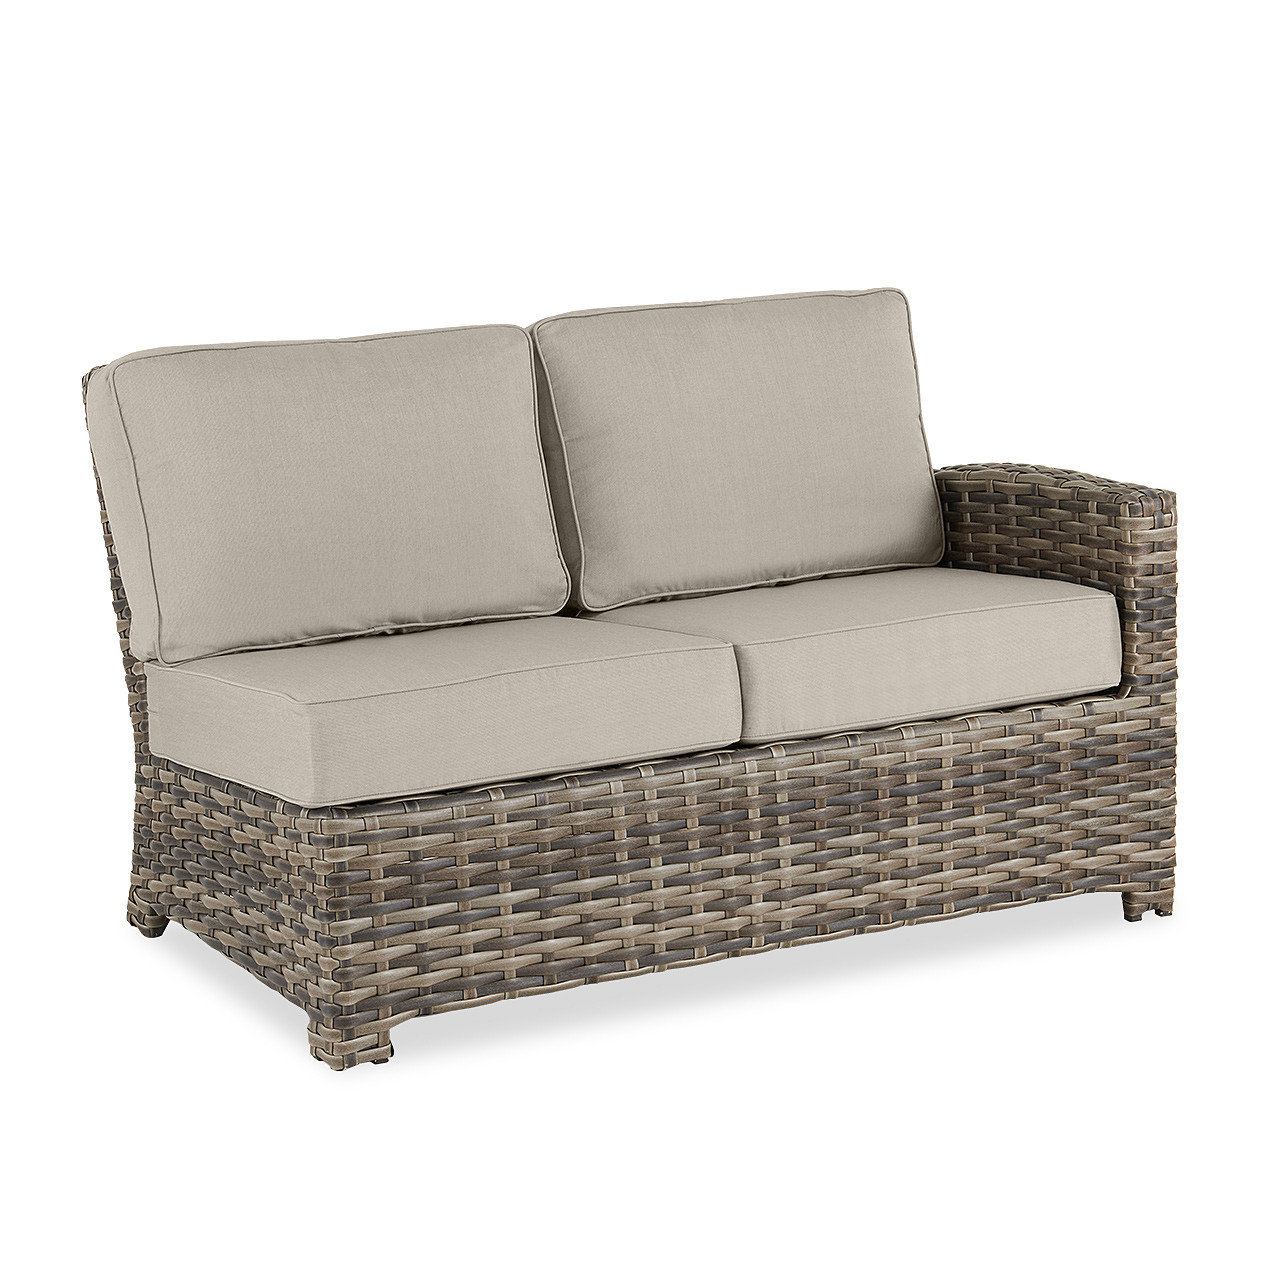 Contempo Husk Outdoor Wicker with Cushions Right Arm Facing Loveseat